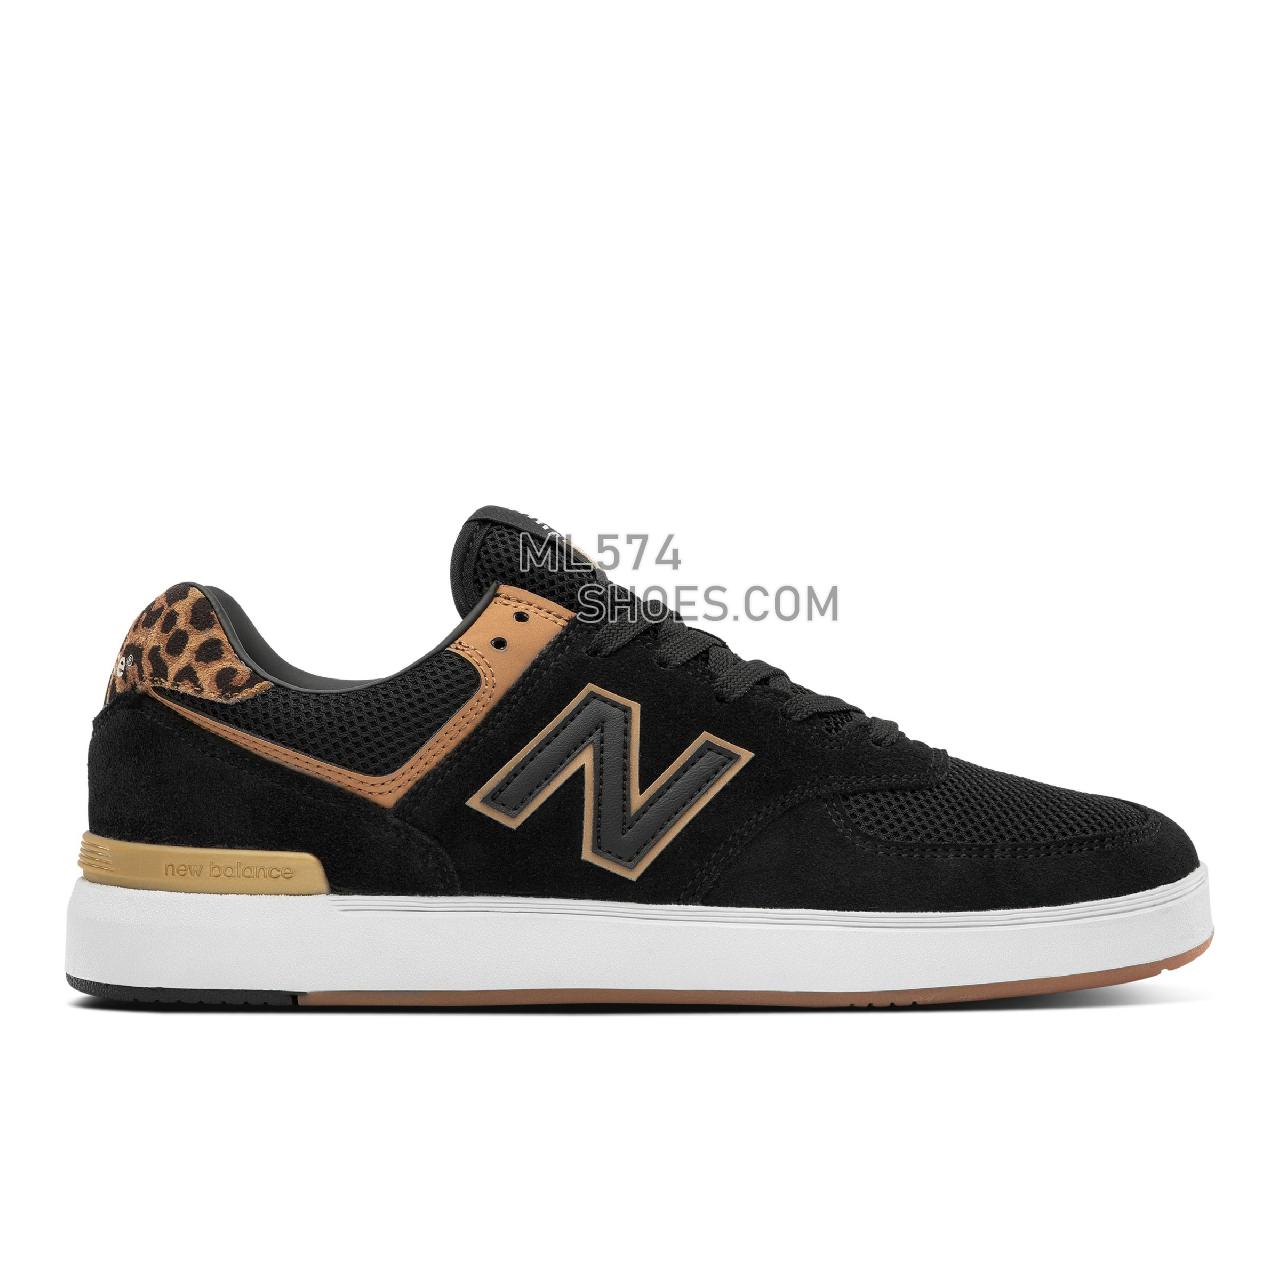 New Balance All Coasts AM574 - Men's Court Classics - Black with Brown - AM574LEP